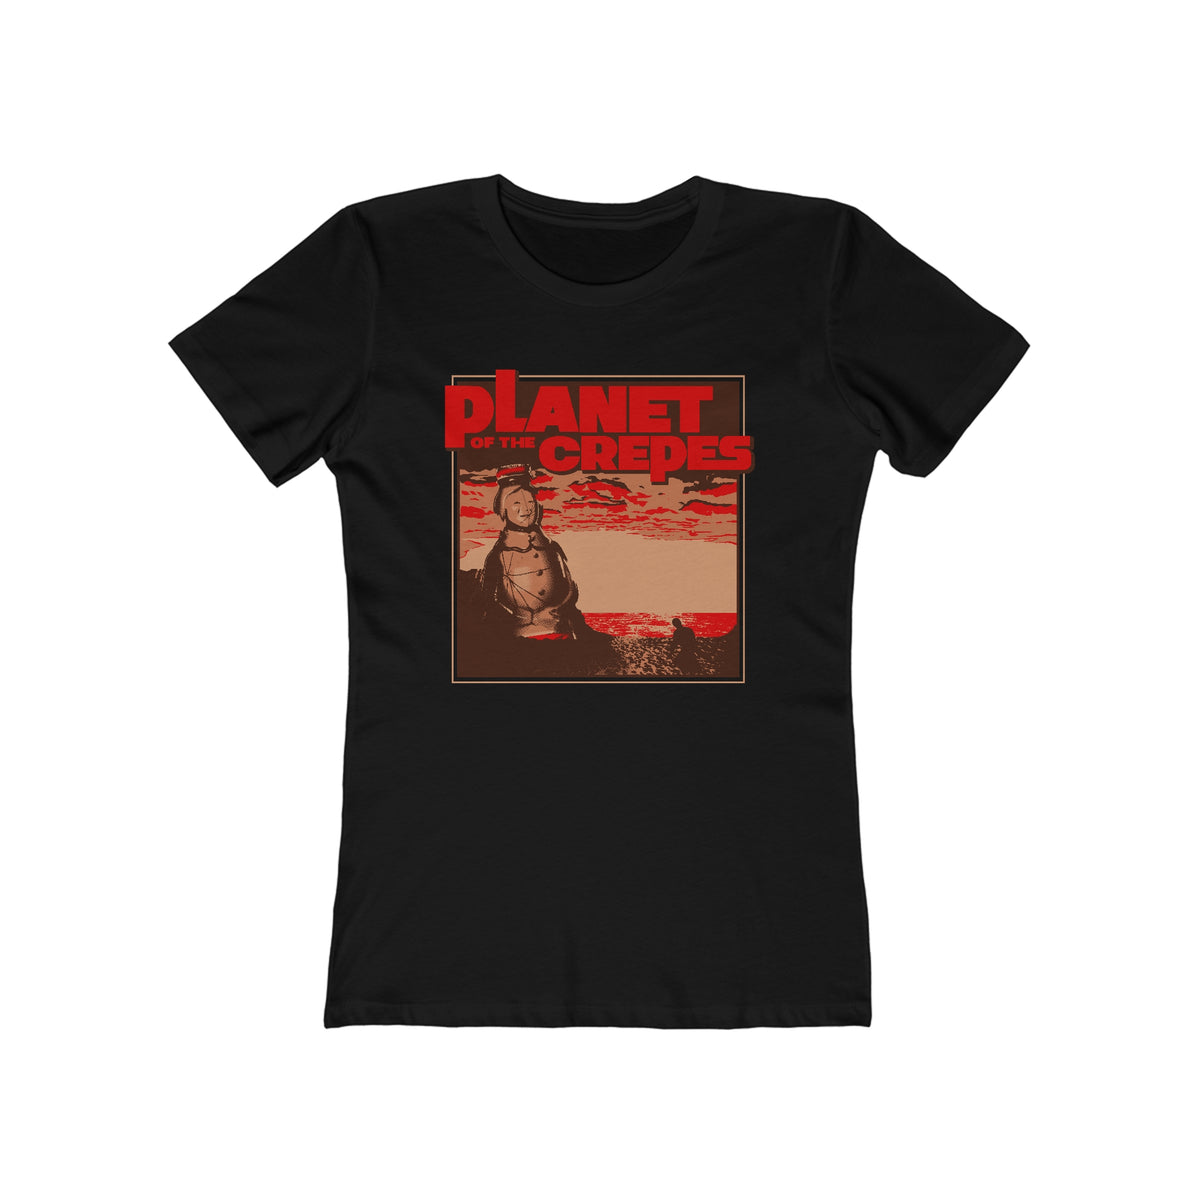 Planet Of The Crepes - Women’s T-Shirt